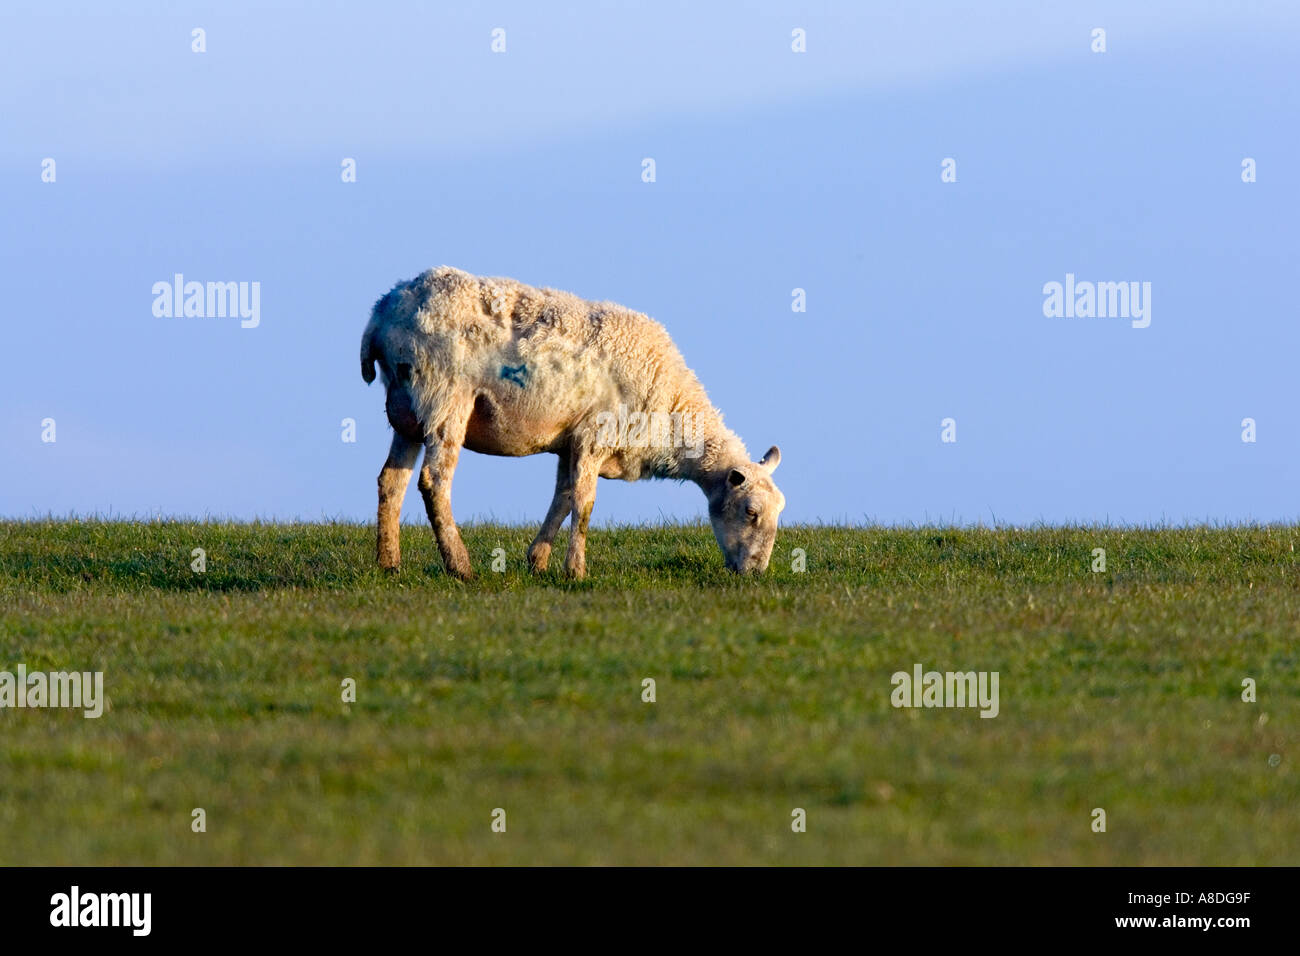 sheep grazing in grass field with blue sky background in Wales Stock Photo